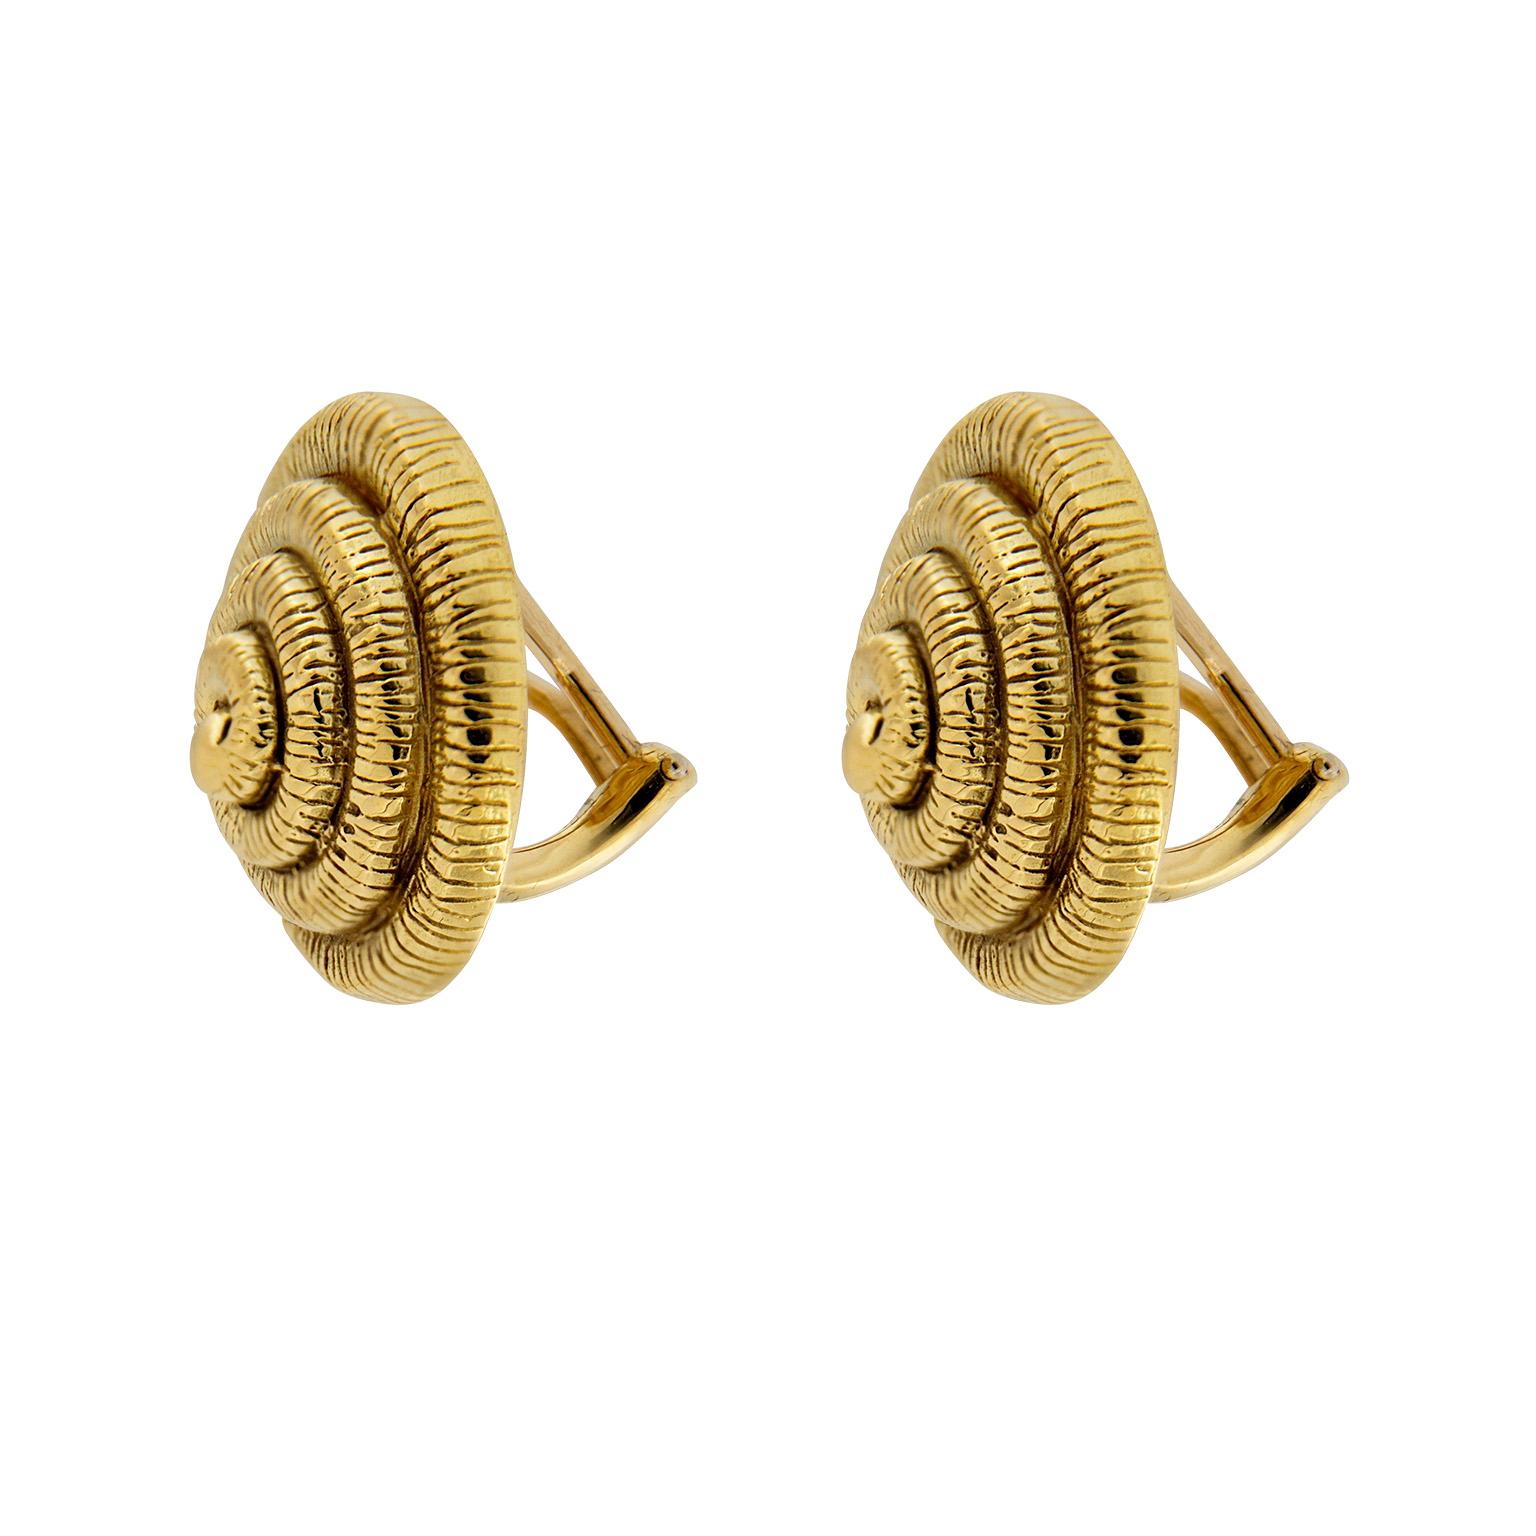 Valentin Magro 18 Karat Yellow Gold Nautilus Shell Earrings are coil inspired. The design starts as an 18k yellow gold knob, polished smooth. From here a spiral emerges, covered in fine parallel grooves. This whorl creates the shell imagery.